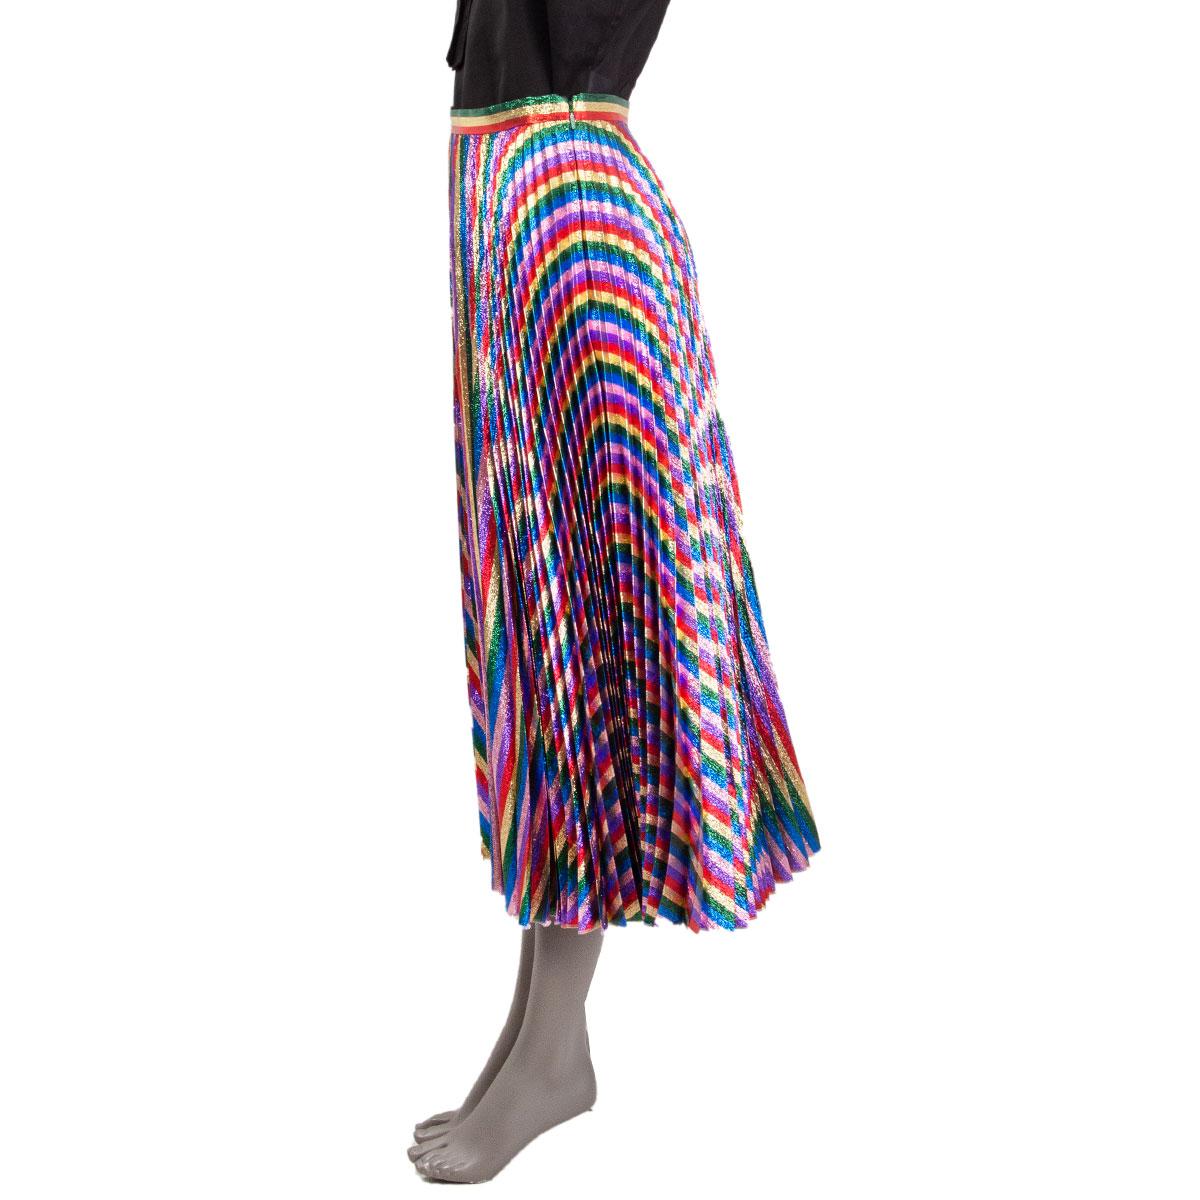 100% authentic Gucci plisse lurex high waisted skirt in multicolor polyester (54%) and silk (46%) (missing content tag). Closes with a concealed zipper on the side. Unlined. Has been worn and is in excellent condition.

Tag Size	Missing Tag